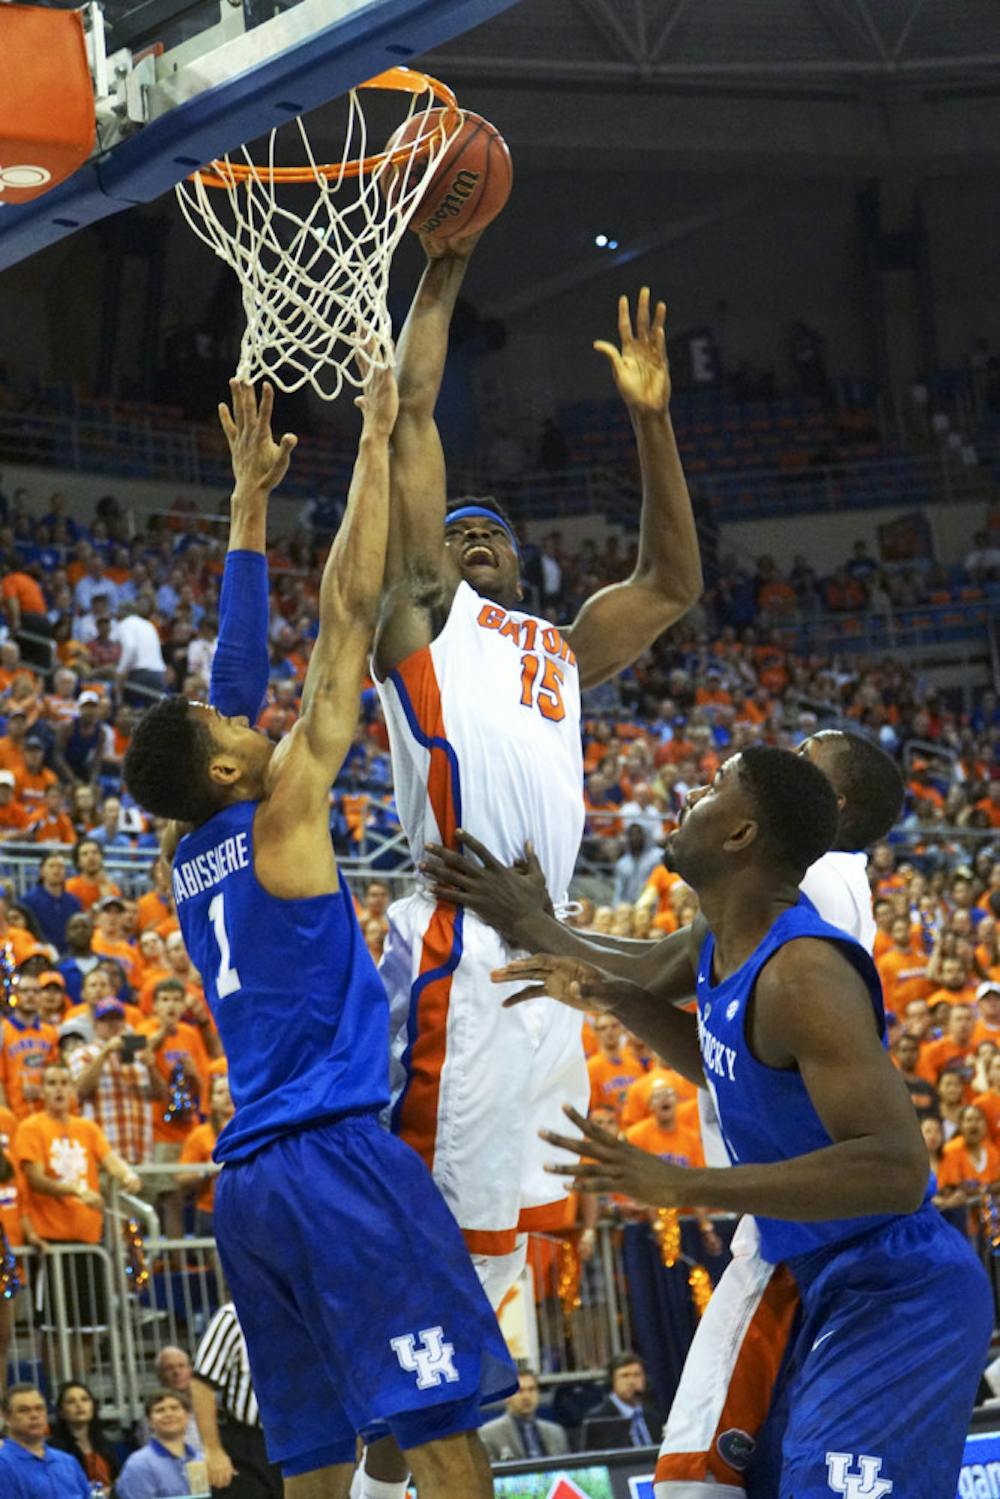 <p>John Egbunu dunks during Florida's 88-79 loss to Kentucky on March 1, 2016, in the O'Connell Center.</p>